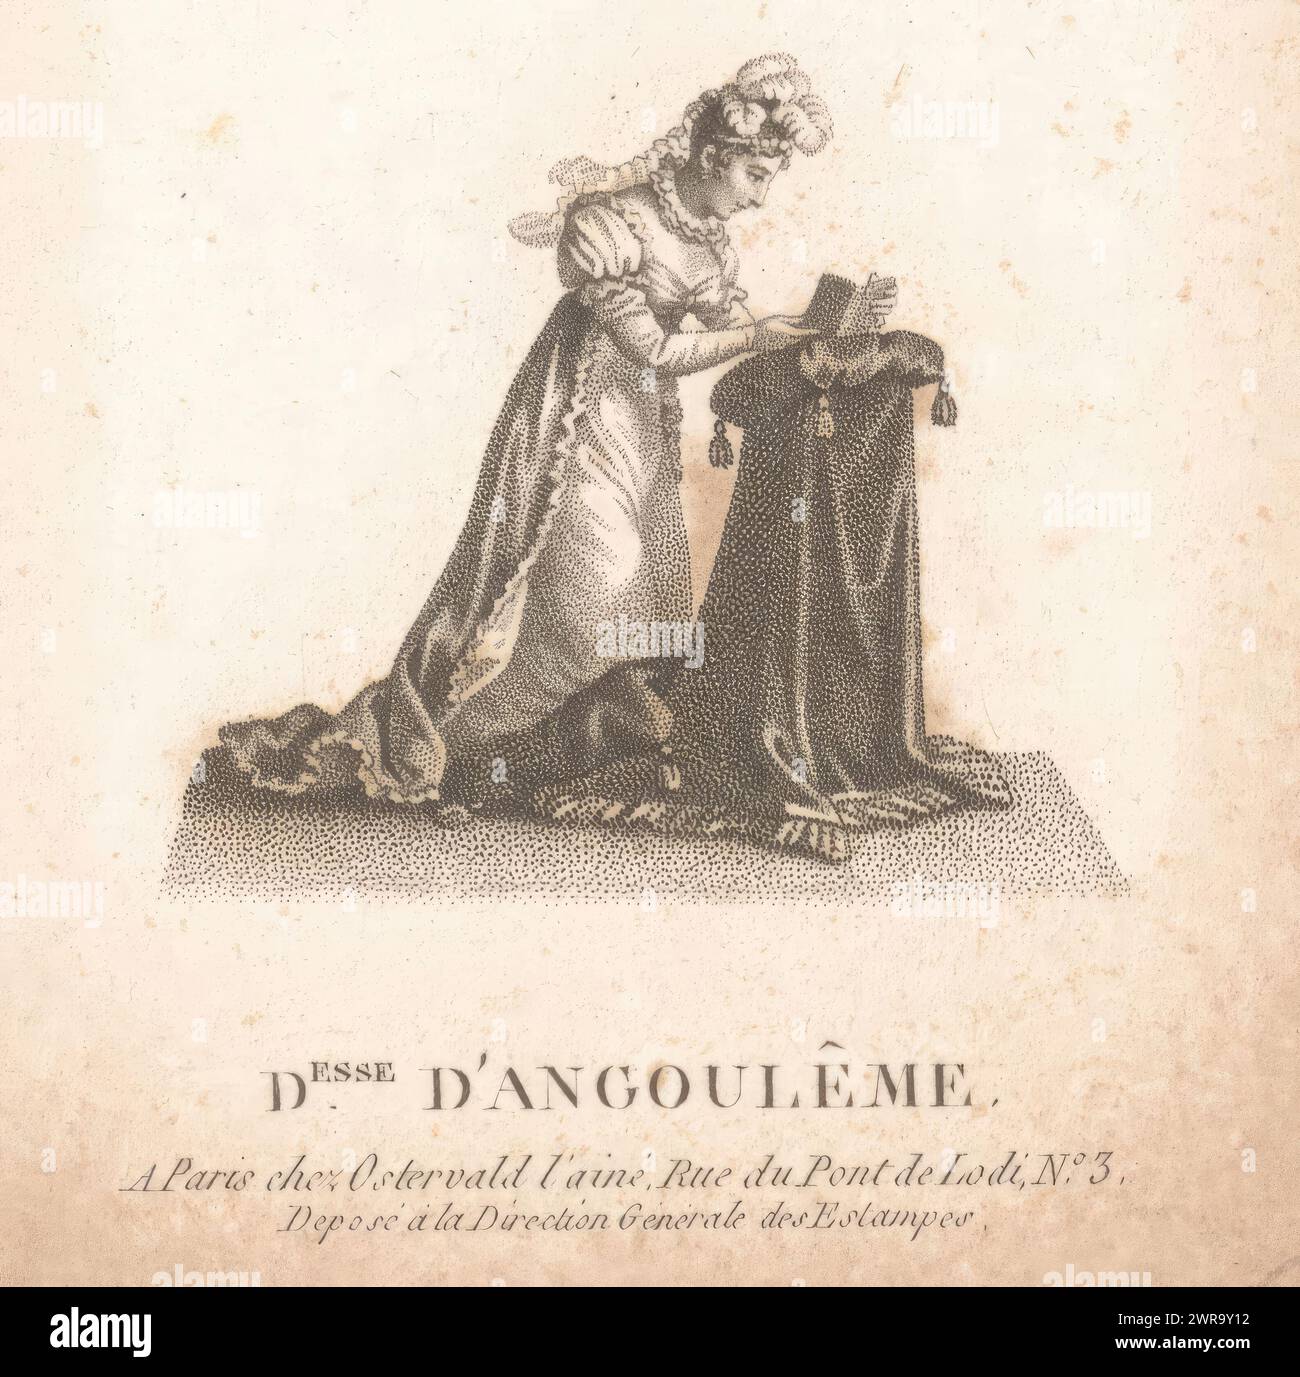 Portrait of Marie Thérèse Charlotte of France in prayer, Desse D'Angoulème. (title on object), print maker: A. Bosselman, publisher: Jean Fréderic Ostervald, Paris, 1814, paper, etching, height 118 mm × width 91 mm, print Stock Photo